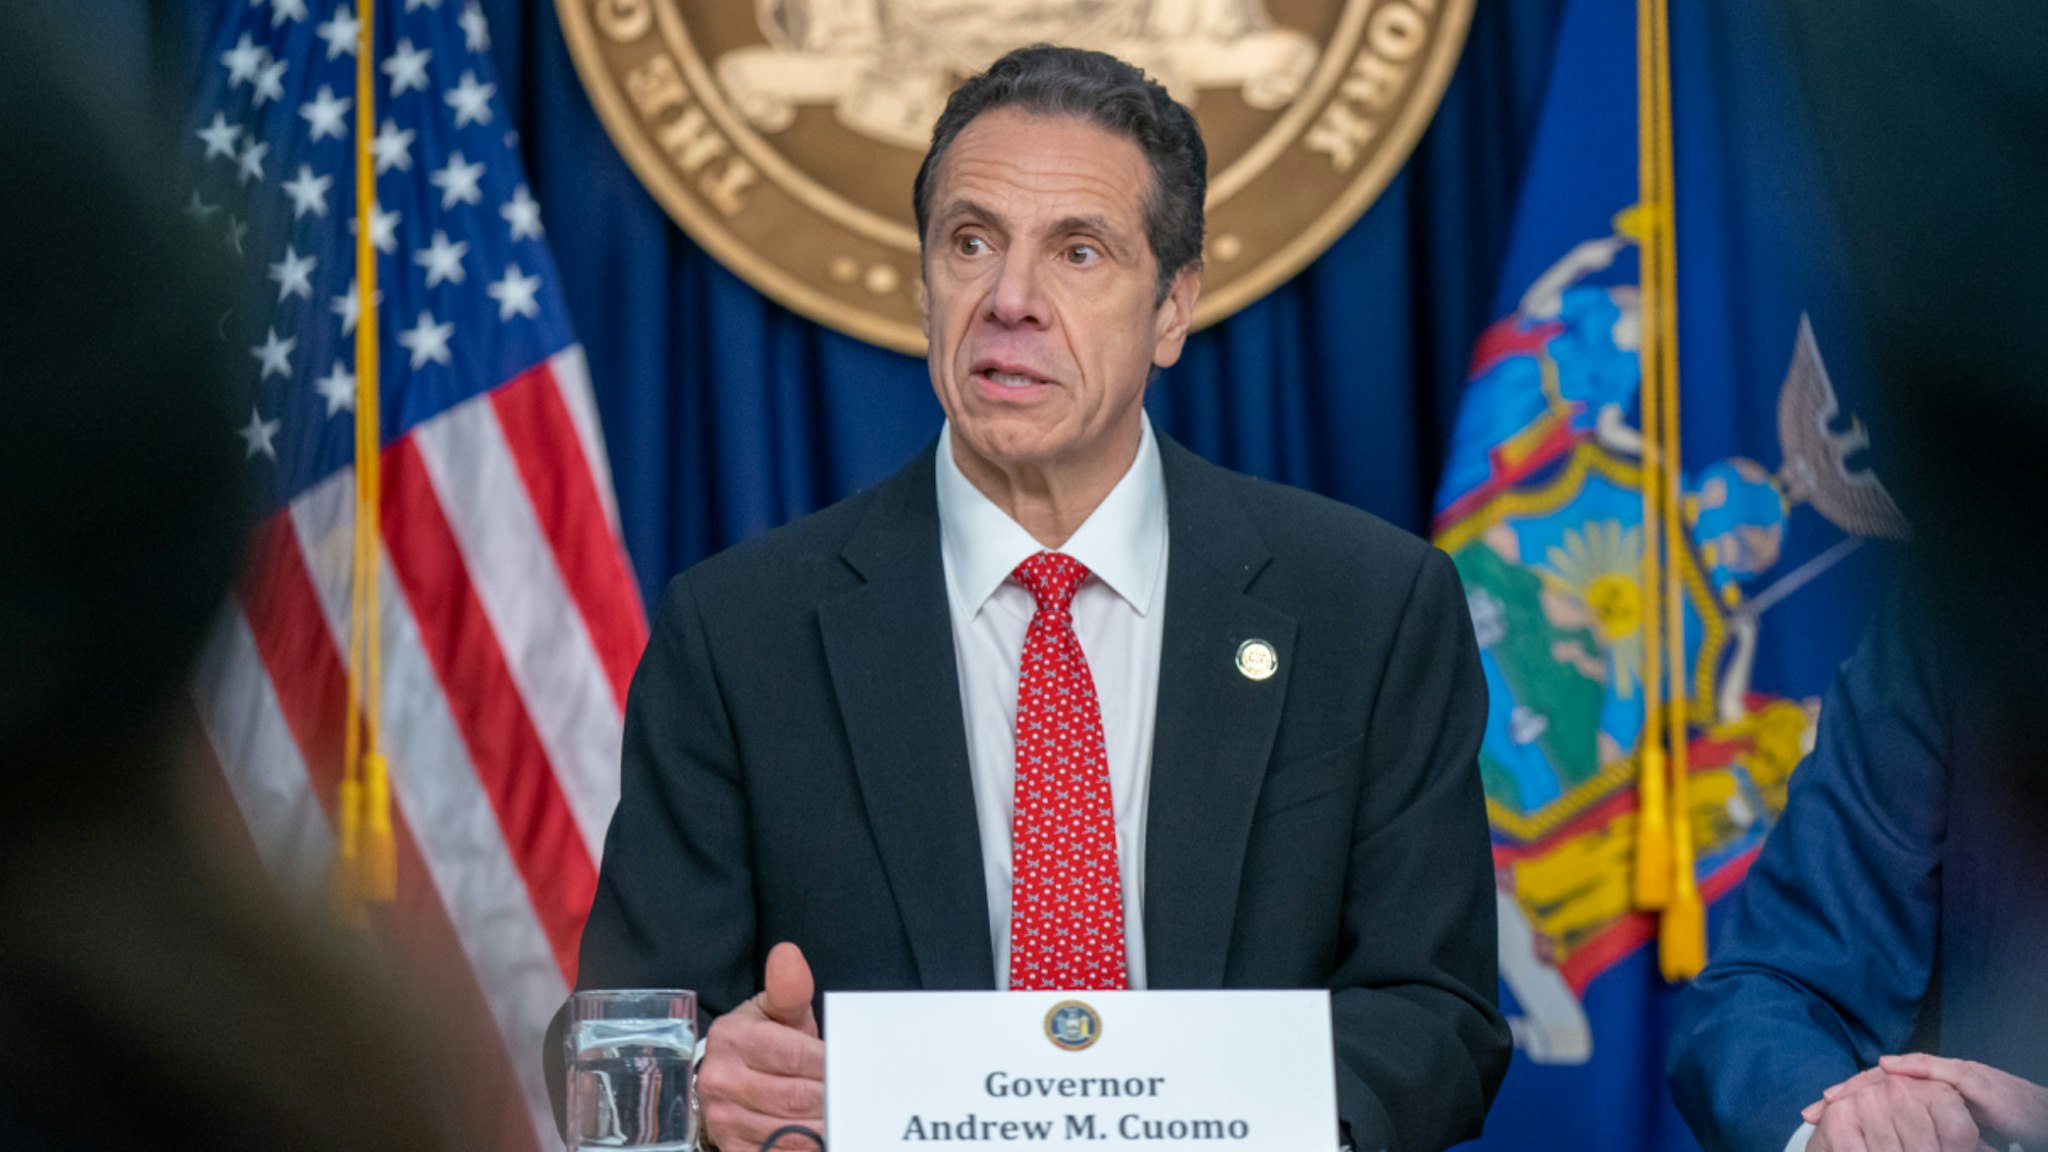 New York state Gov. Andrew Cuomo speaks during a news conference on the first confirmed case of COVID-19 in New York on March 2, 2020 in New York City.